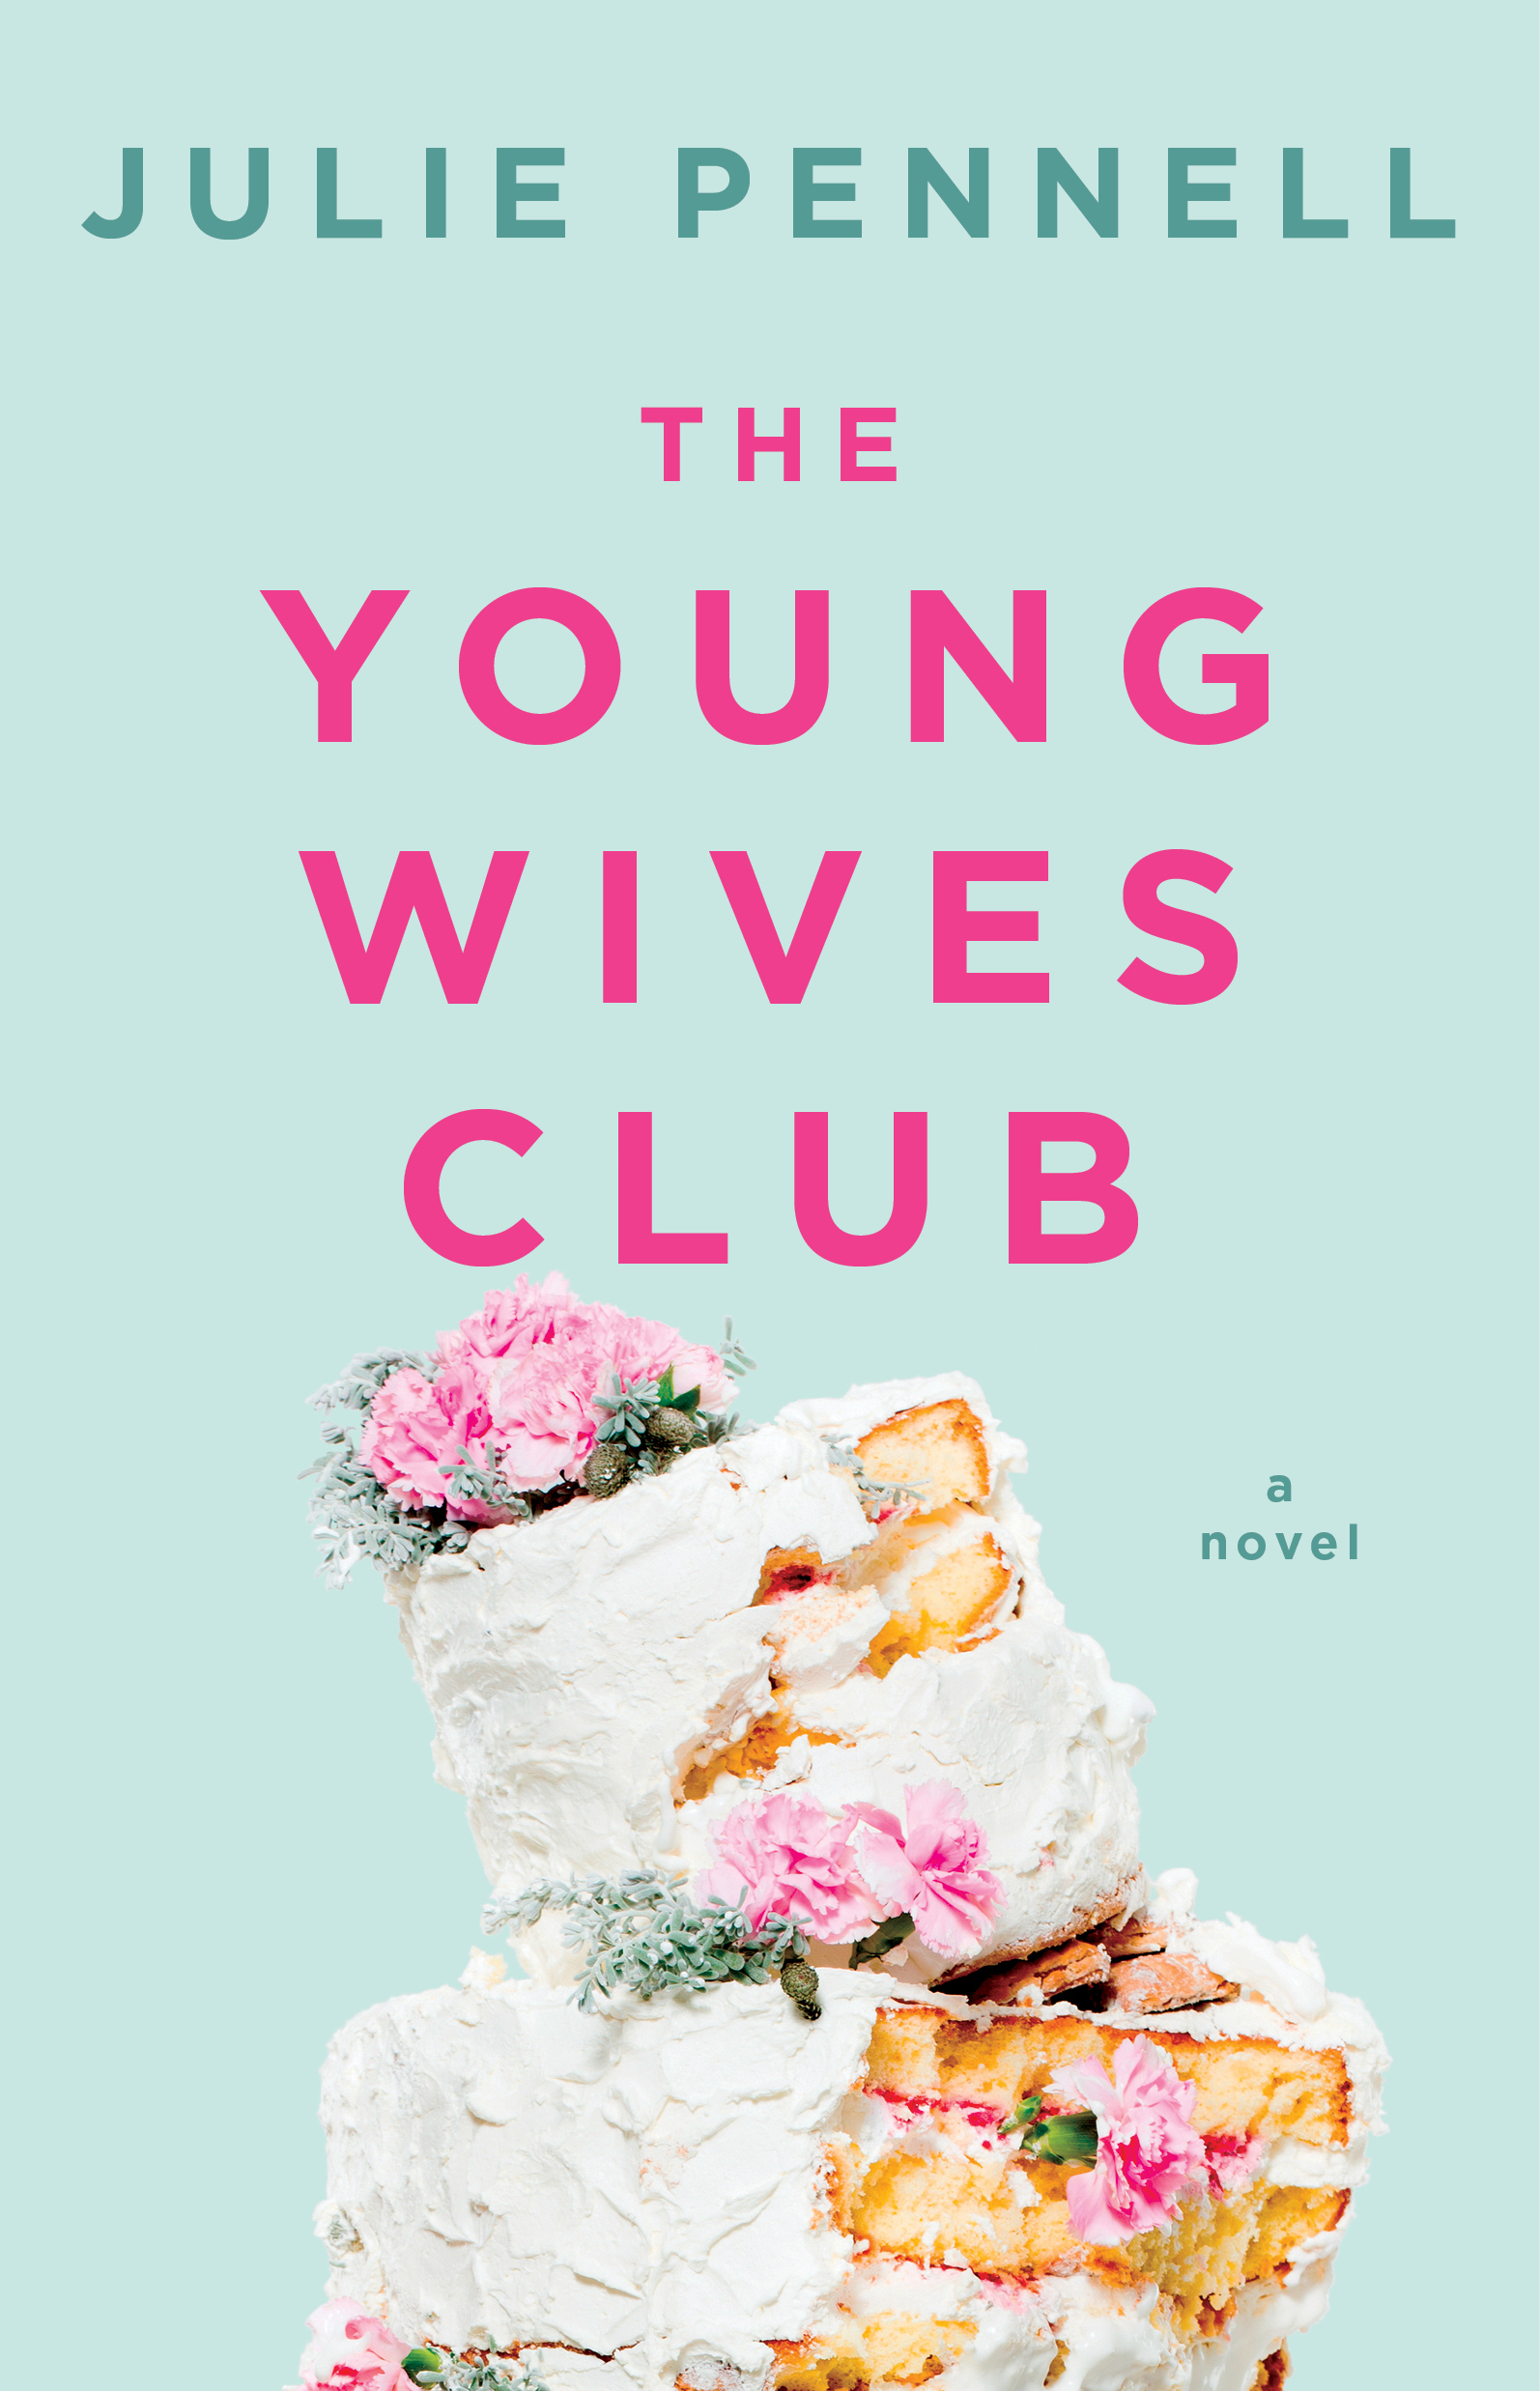 Book Launch: The Young Wives Club by Julie Pennell